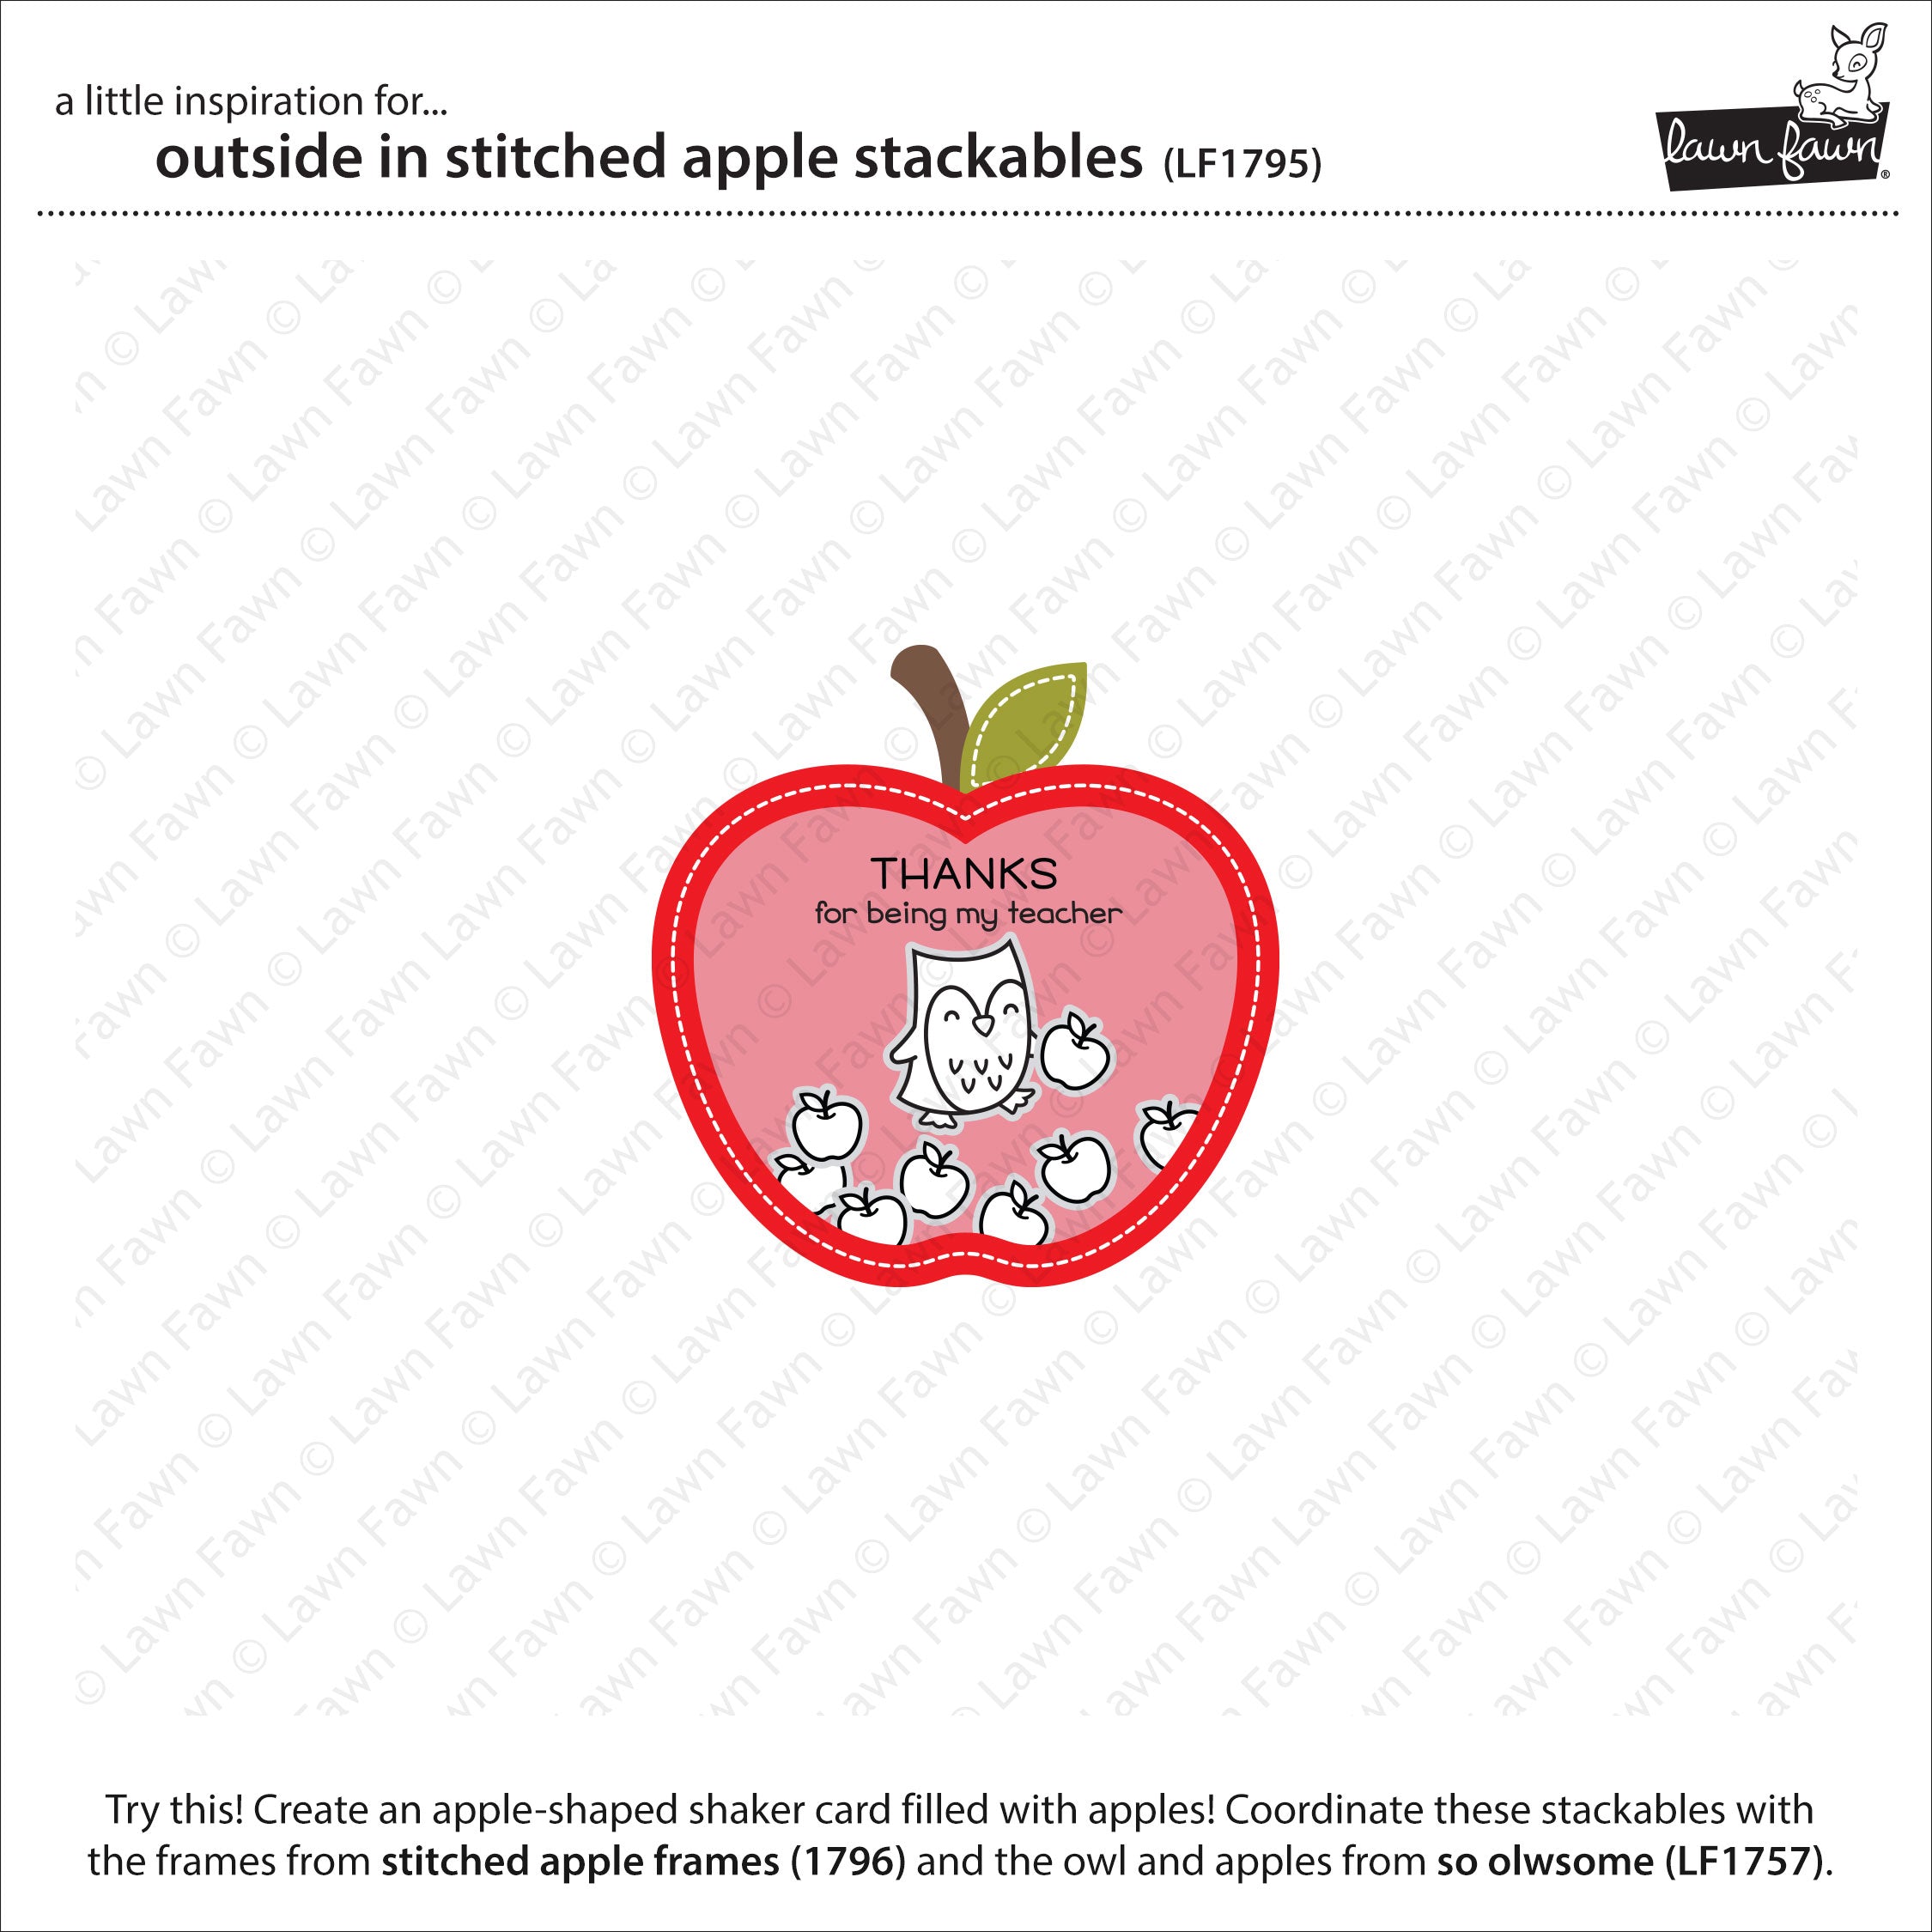 outside in stitched apple stackables